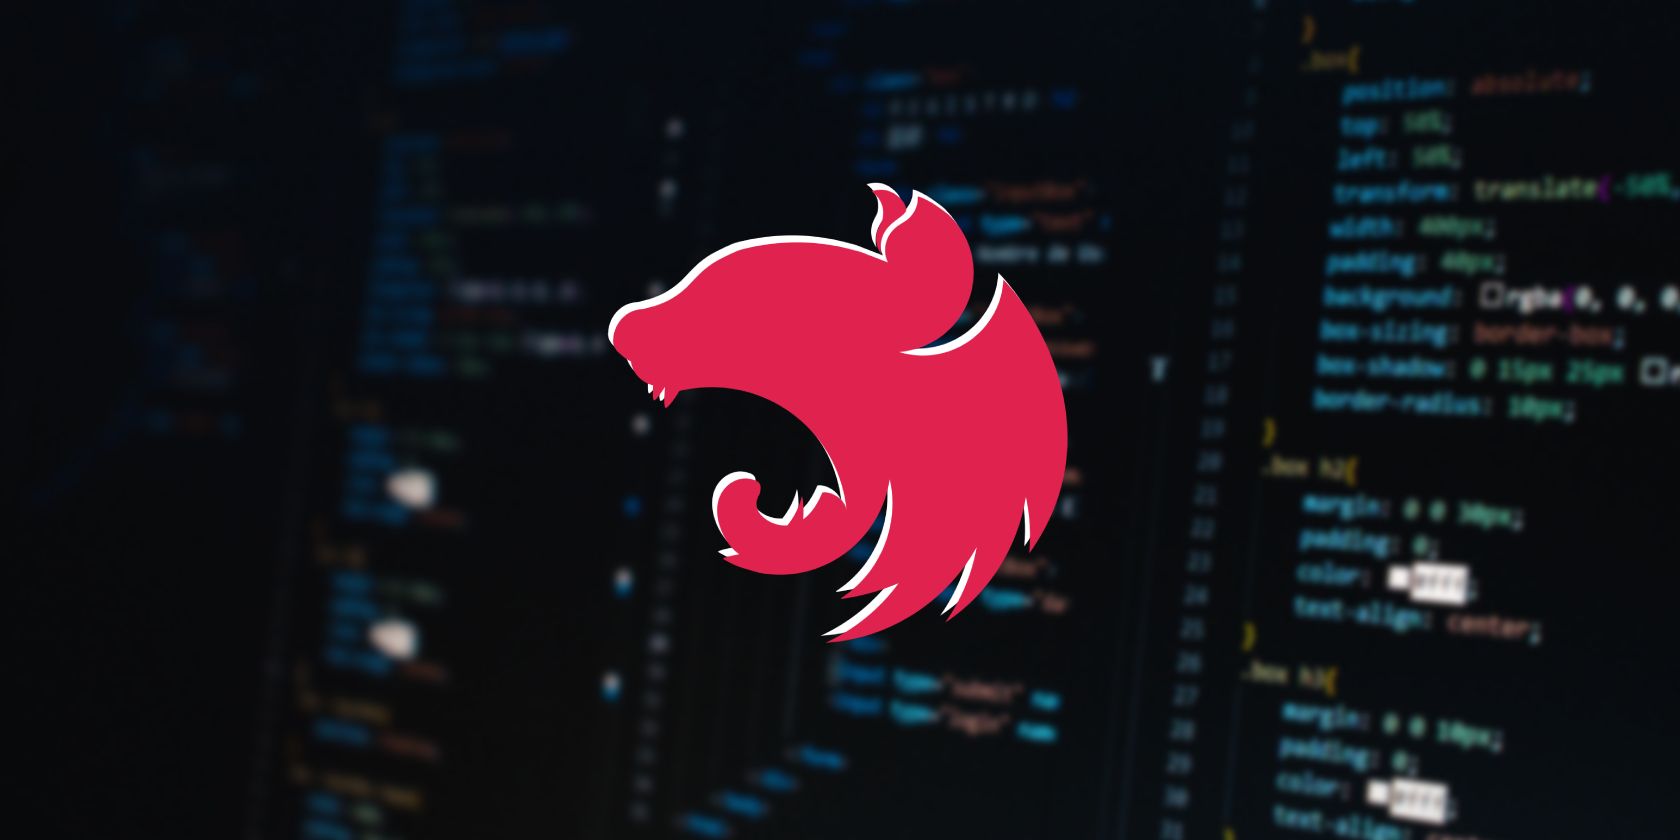 The Nest.js logo, a red silhouette of a cat's head, superimposed on code in an editor